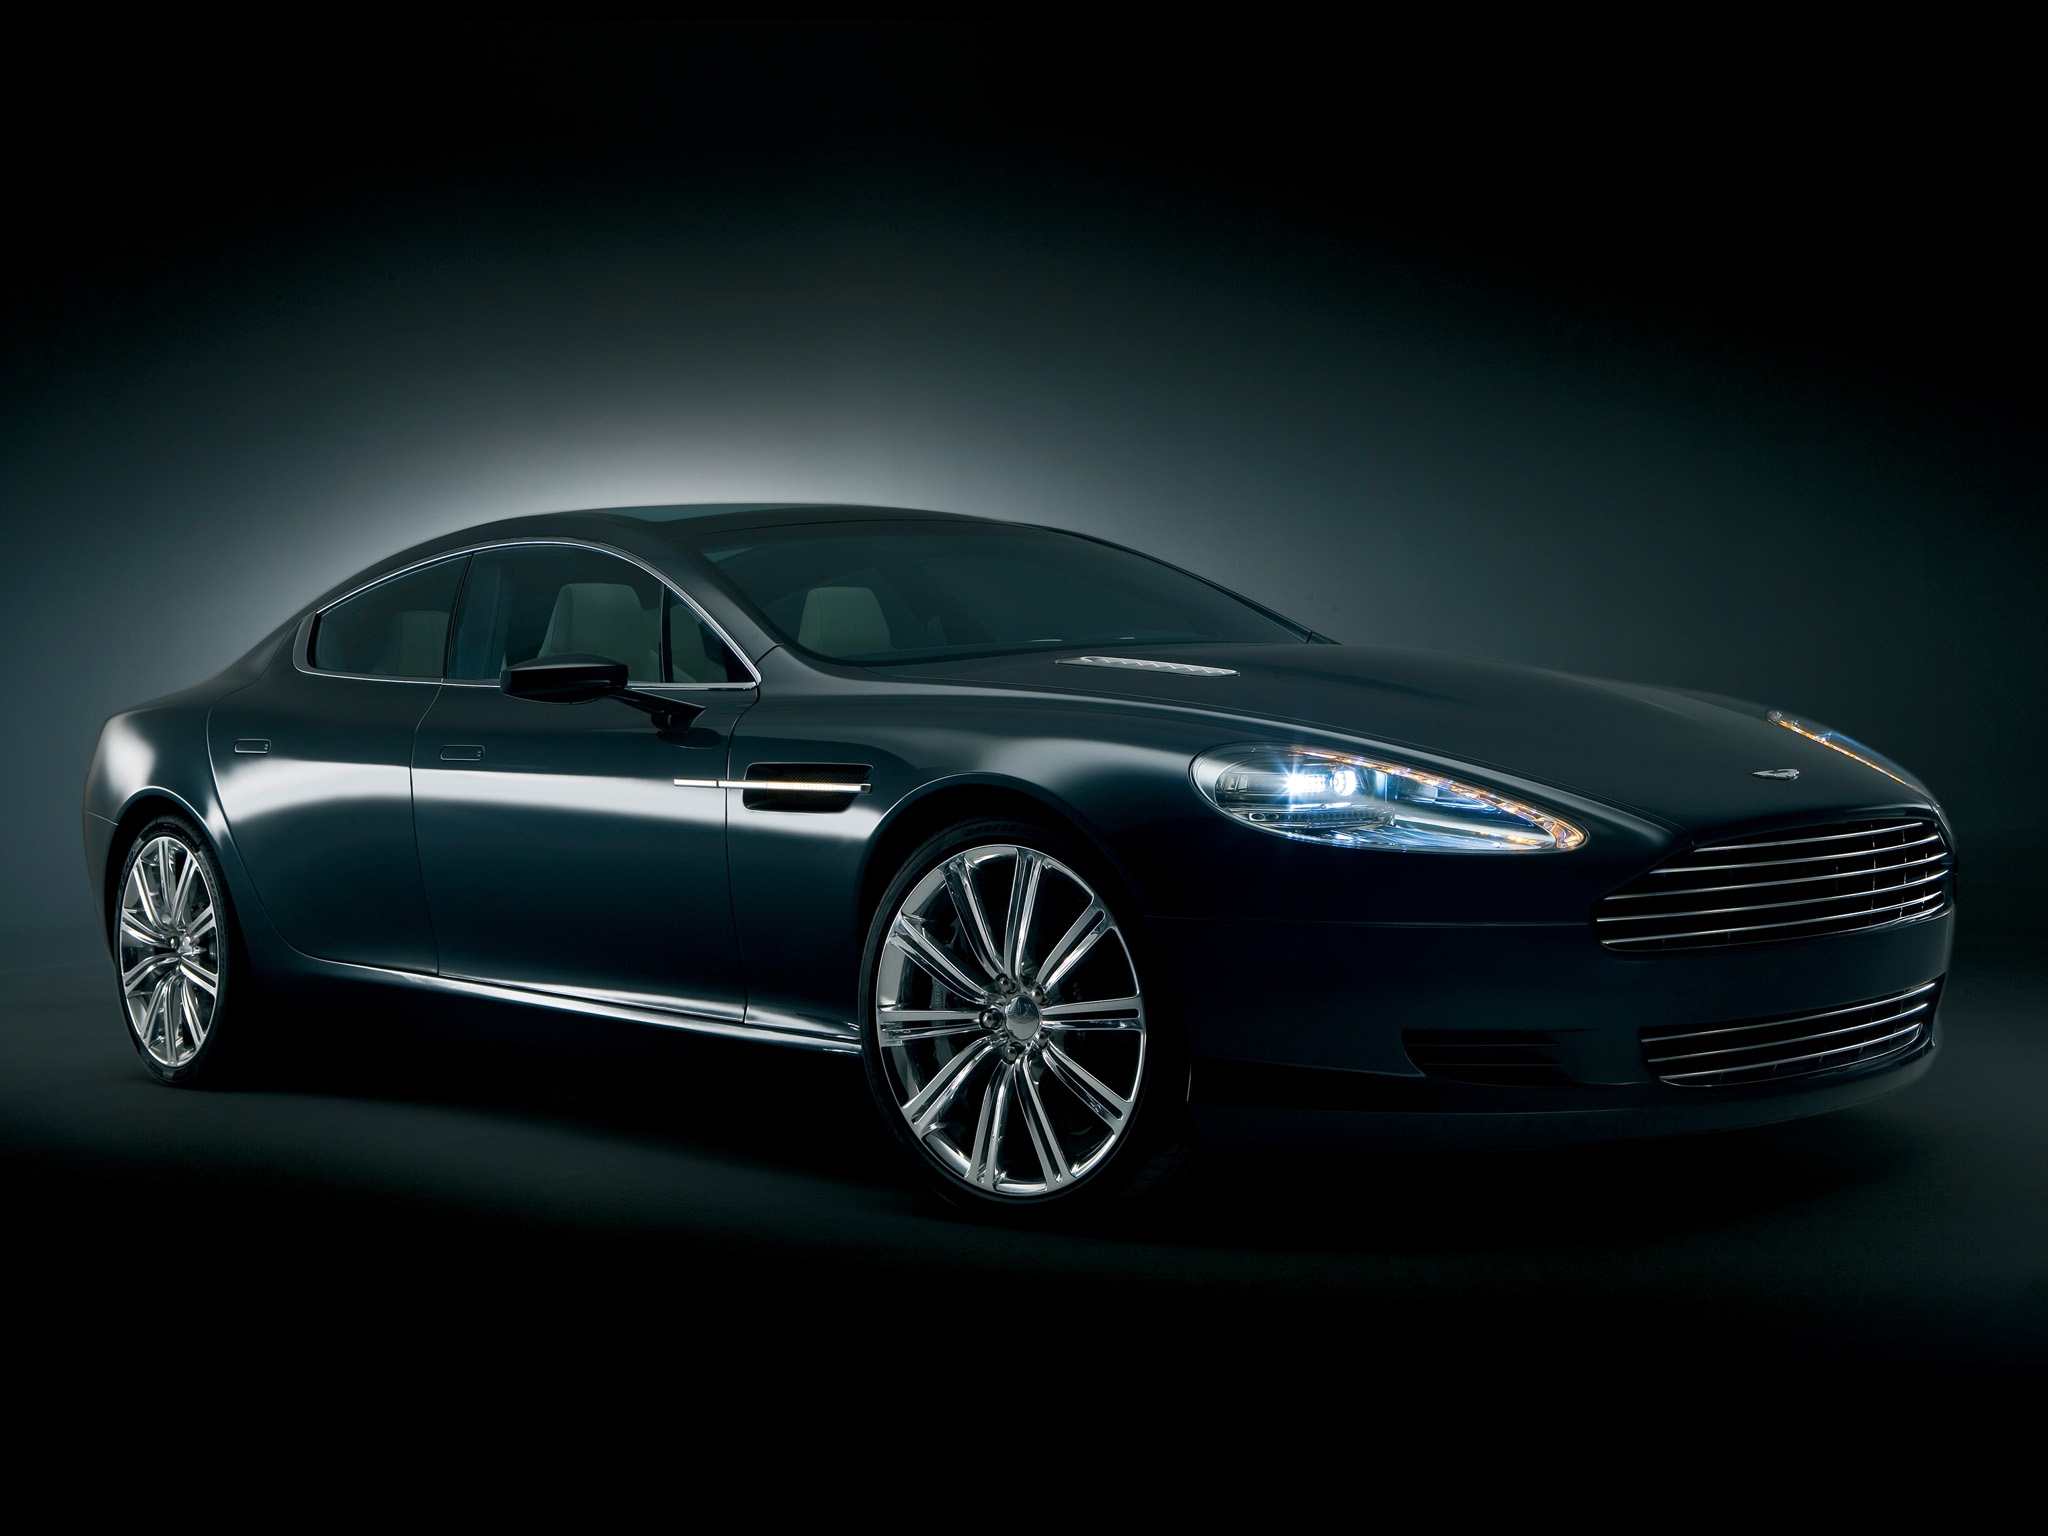 cars, black, aston martin, side view, style, concept car, 2006, rapide